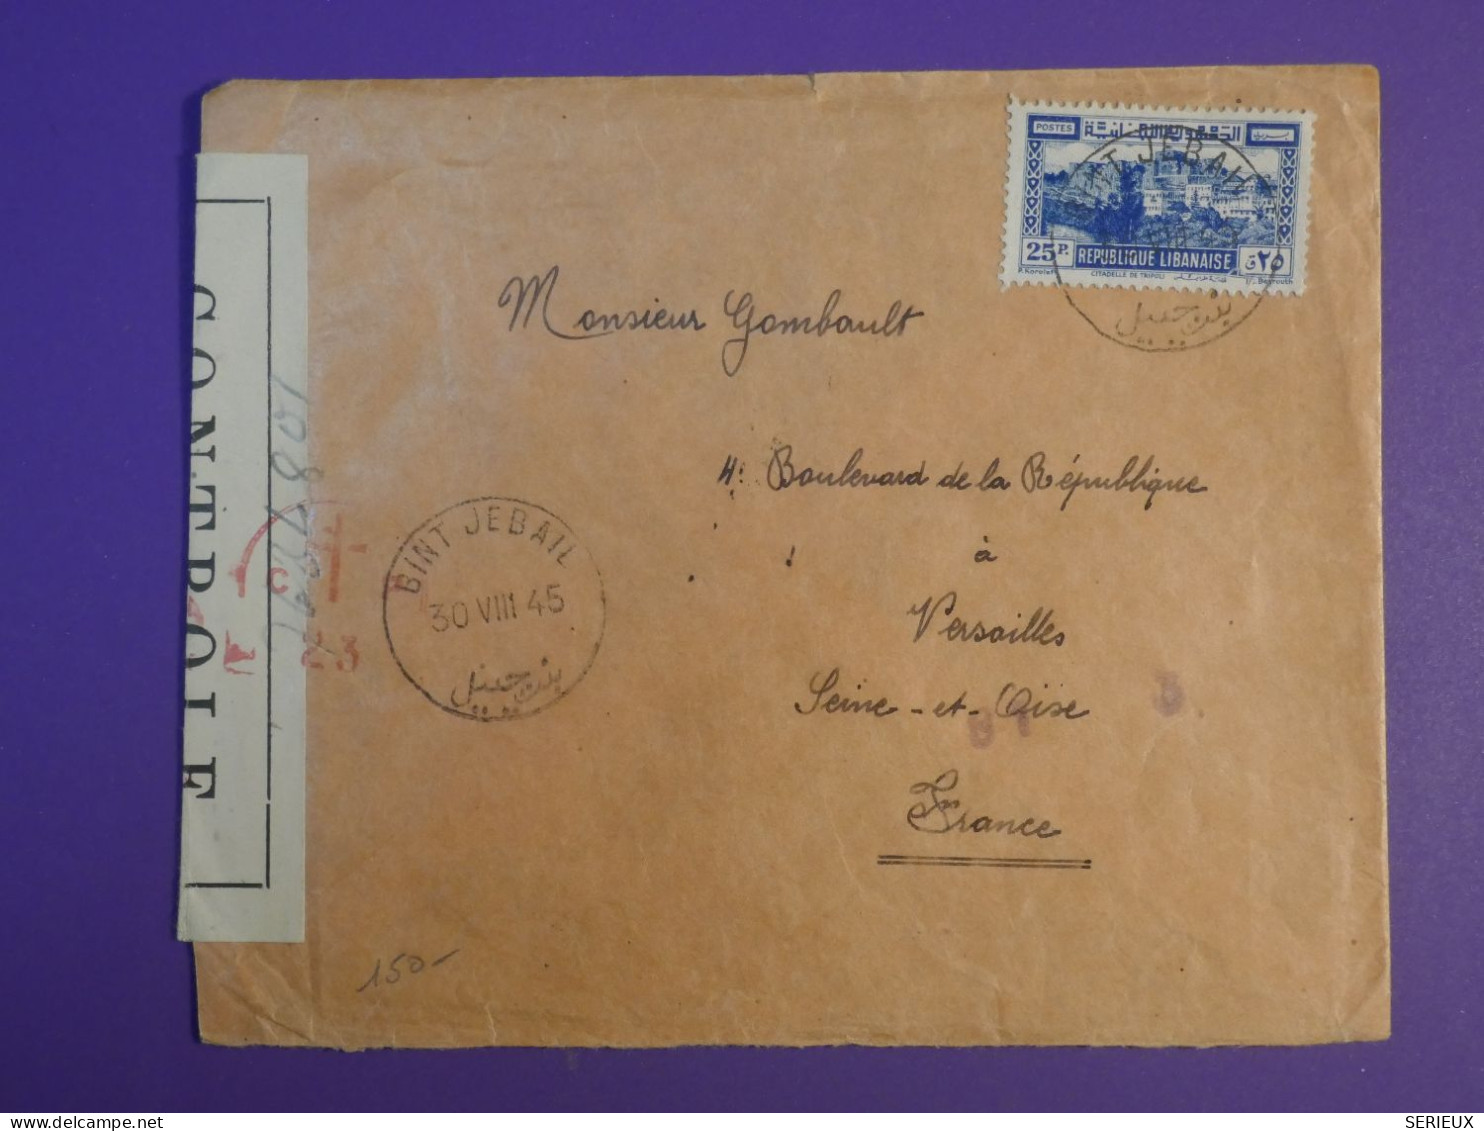 BY0 LIBAN  BELLE LETTRE CENSUREE 1945 BINT JEBAIL A VERSAILLES FRANCE  +AFF. INTERESSANT+ + - Covers & Documents